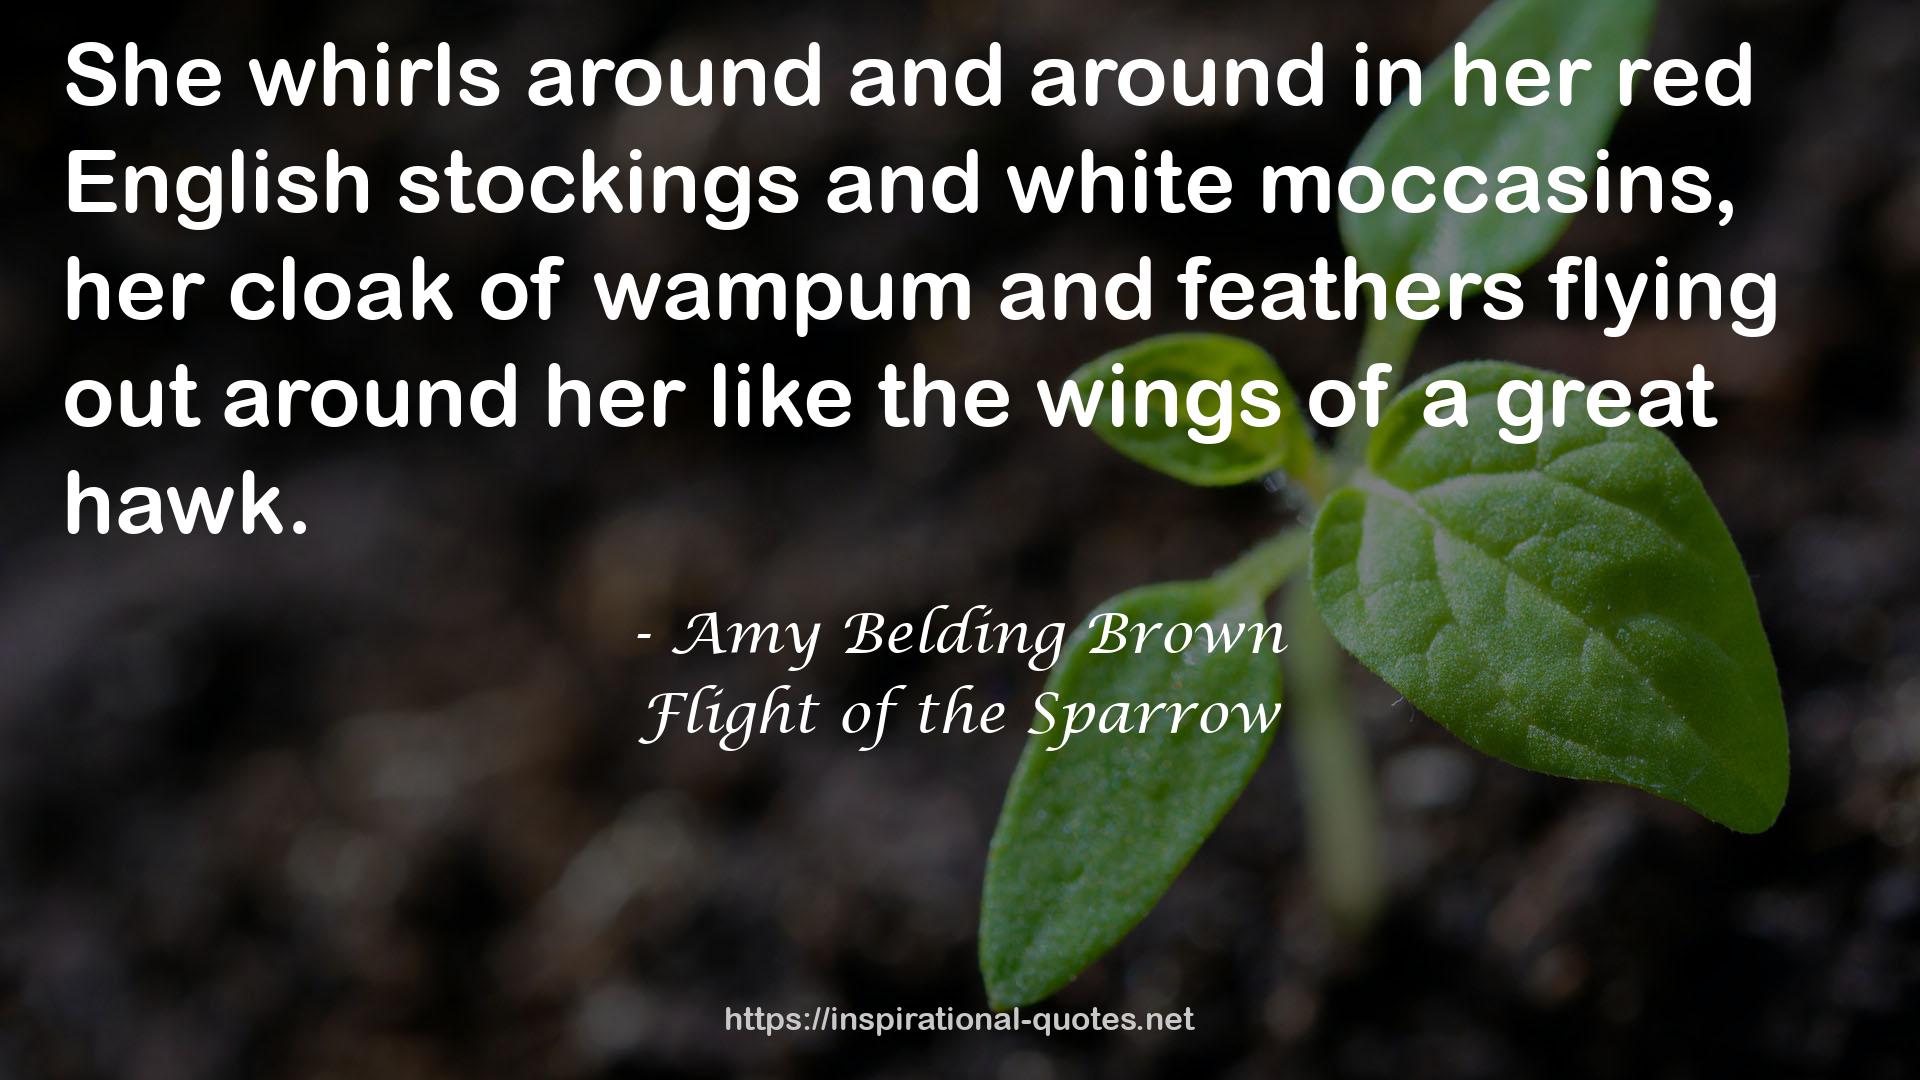 Flight of the Sparrow QUOTES